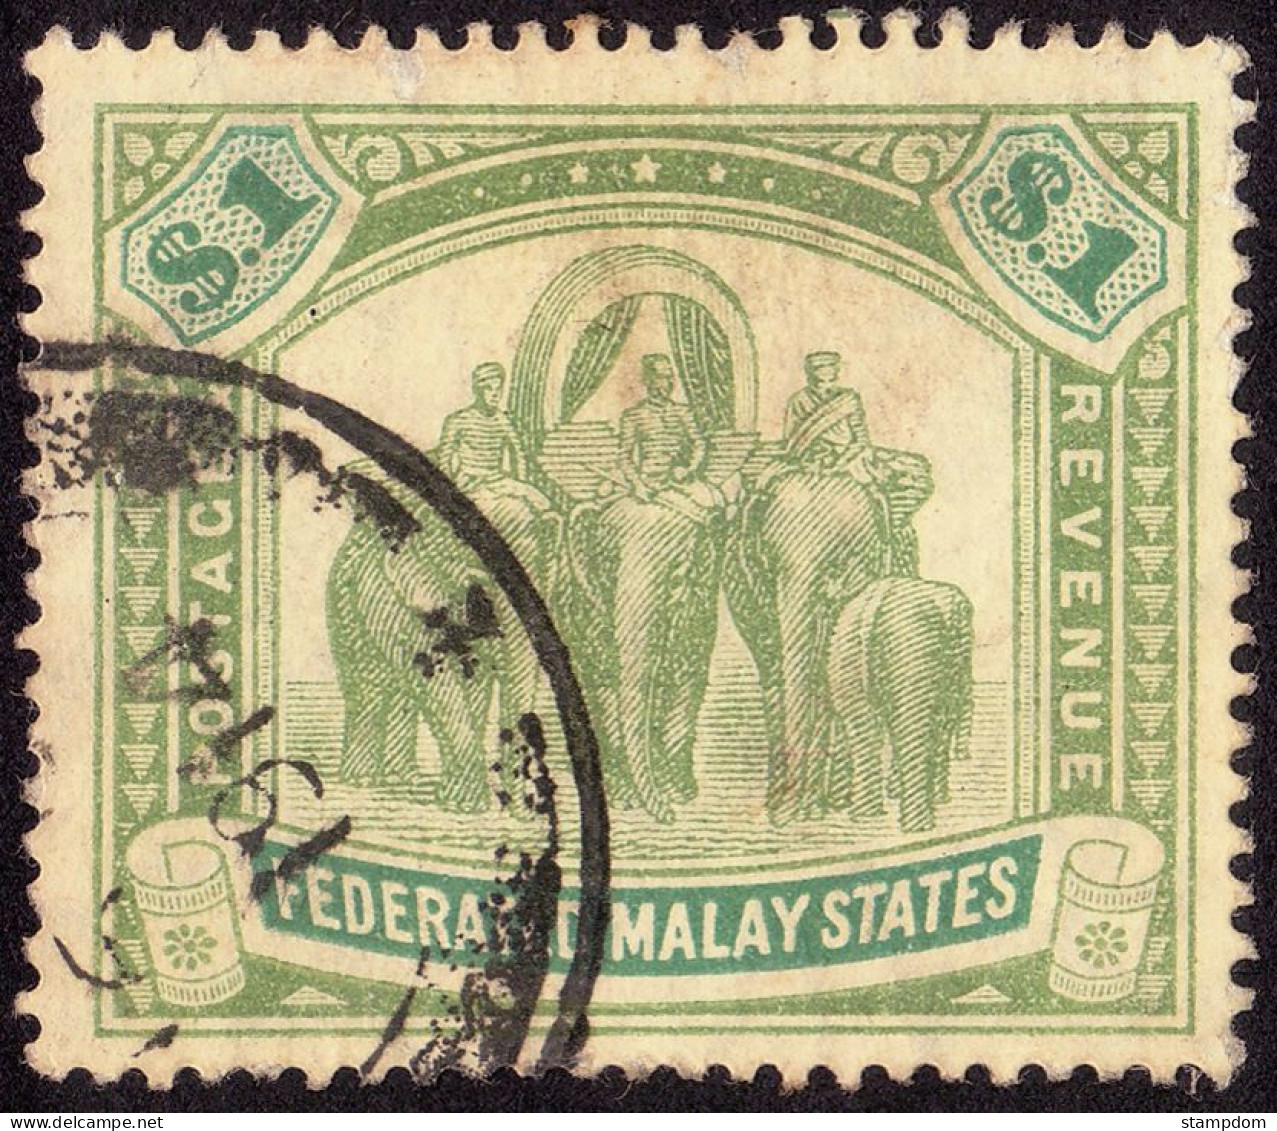 FEDERATED MALAY STATES FMS 1907 $1 Wmk.MCA Sc#34 -USED THIN SPOTS On 3 Perforations @TE91 - Federated Malay States